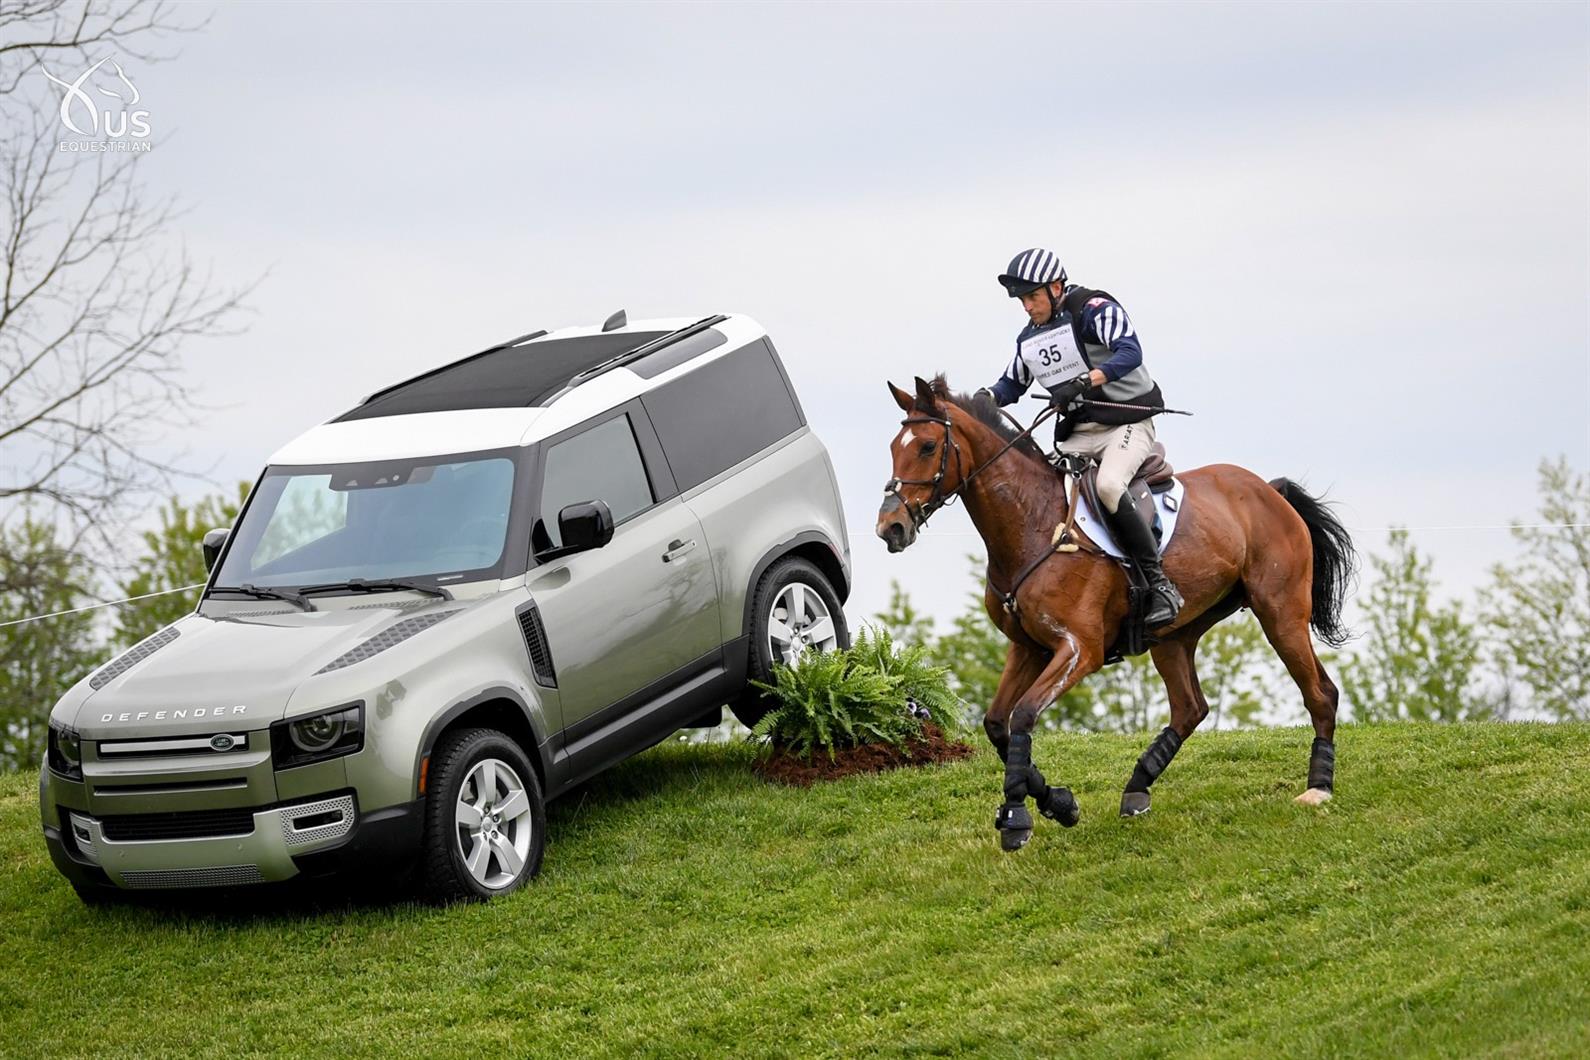 Day Event Class of in into Hold Townend Heading Oliver Second and Boyd Martin Rover Lead 2021 Over Take Ballaghmor Three-Day by Equestrian™; Kentucky presented Final Place and Land MARS On Cue